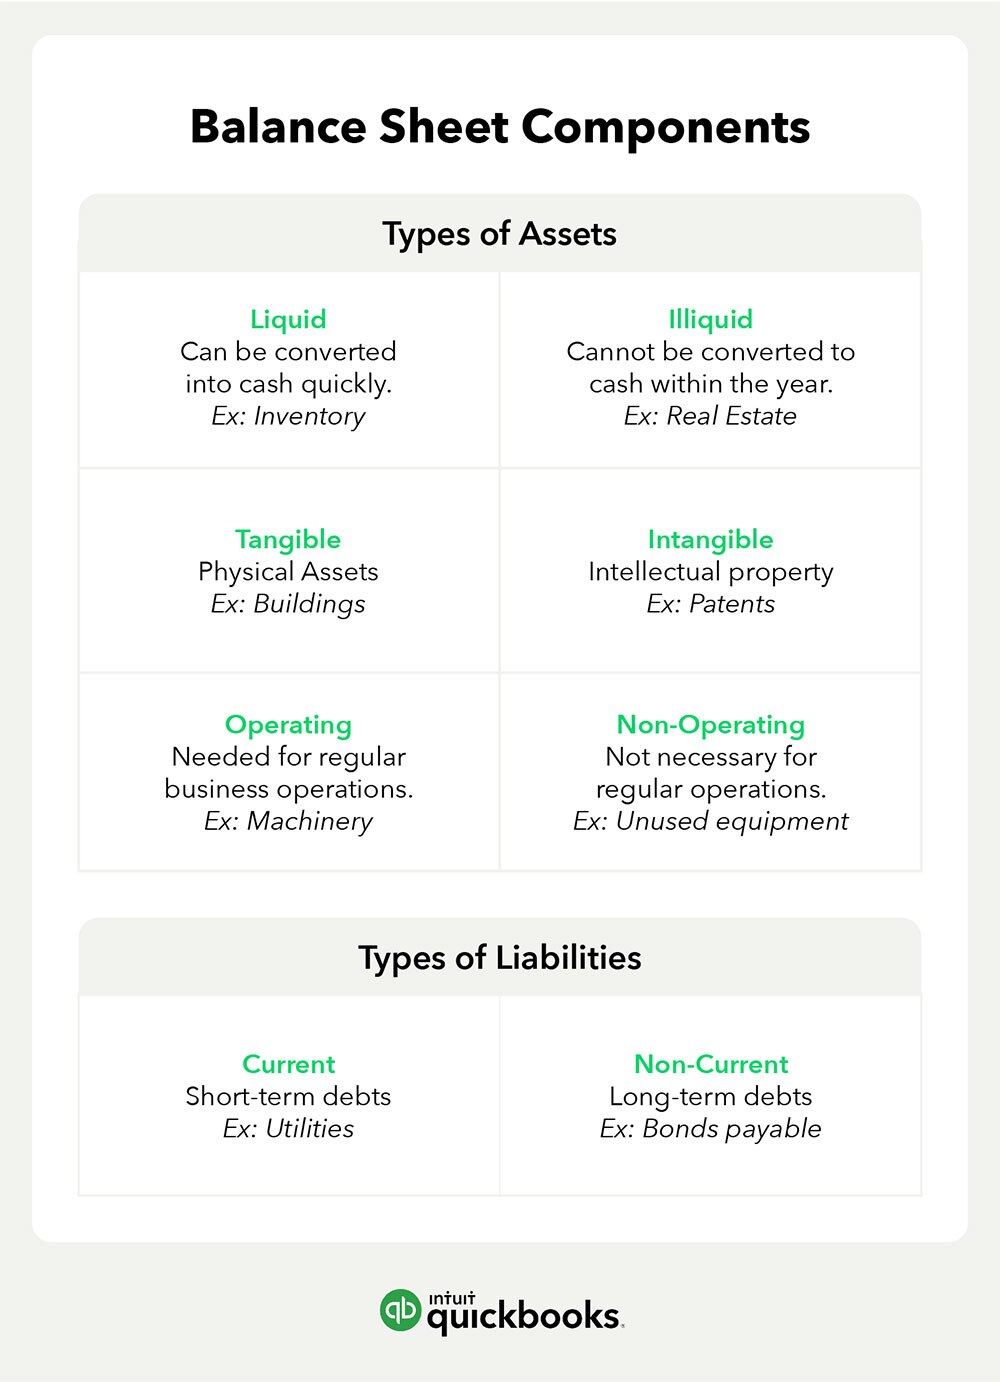 types of assets and liabilities as components of the balance sheet.